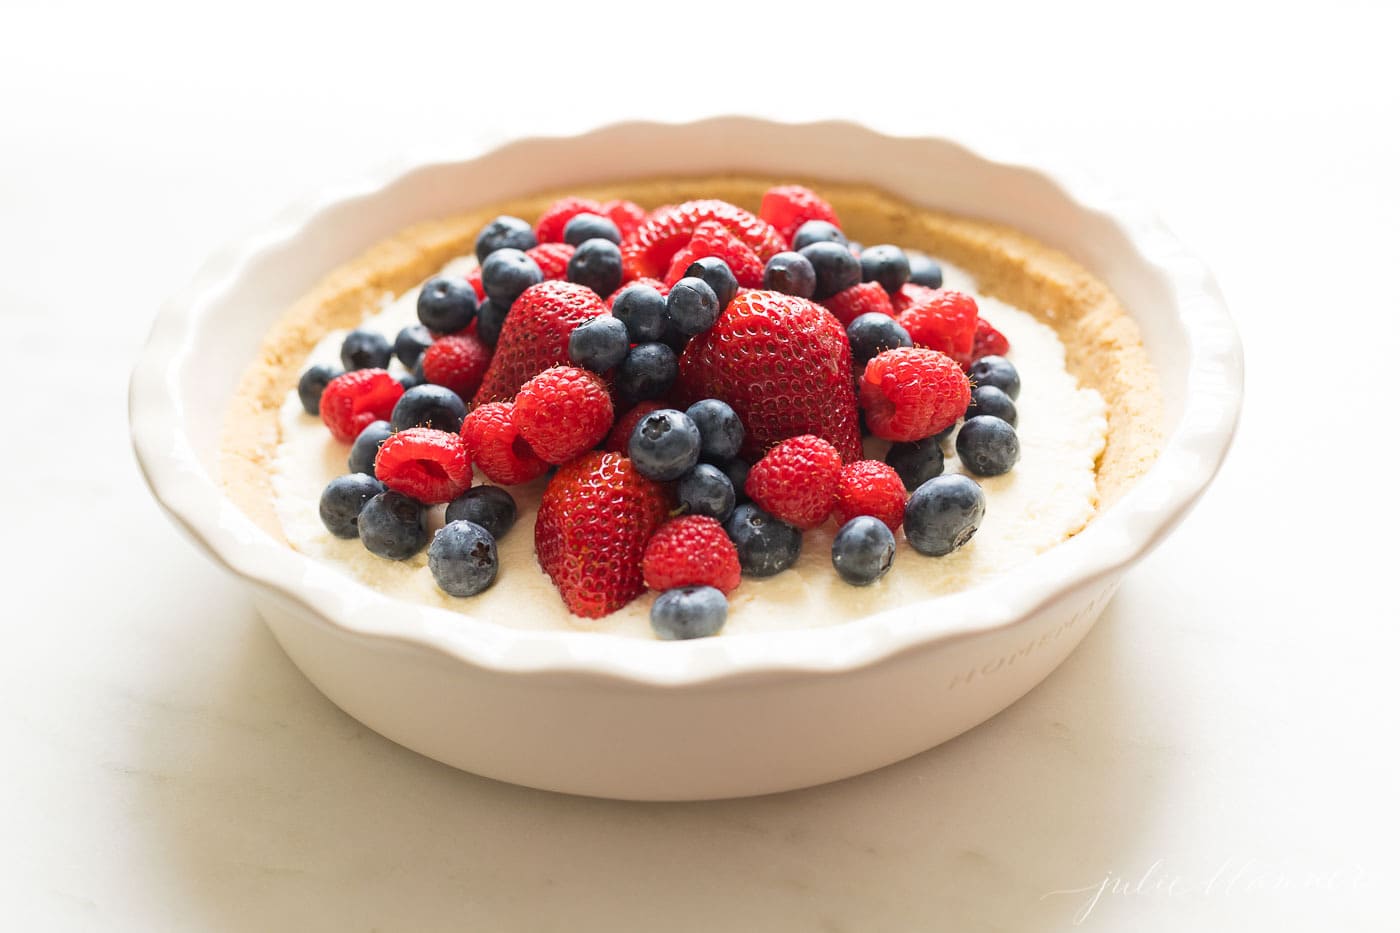 pie dish filled with lemon creme and berries